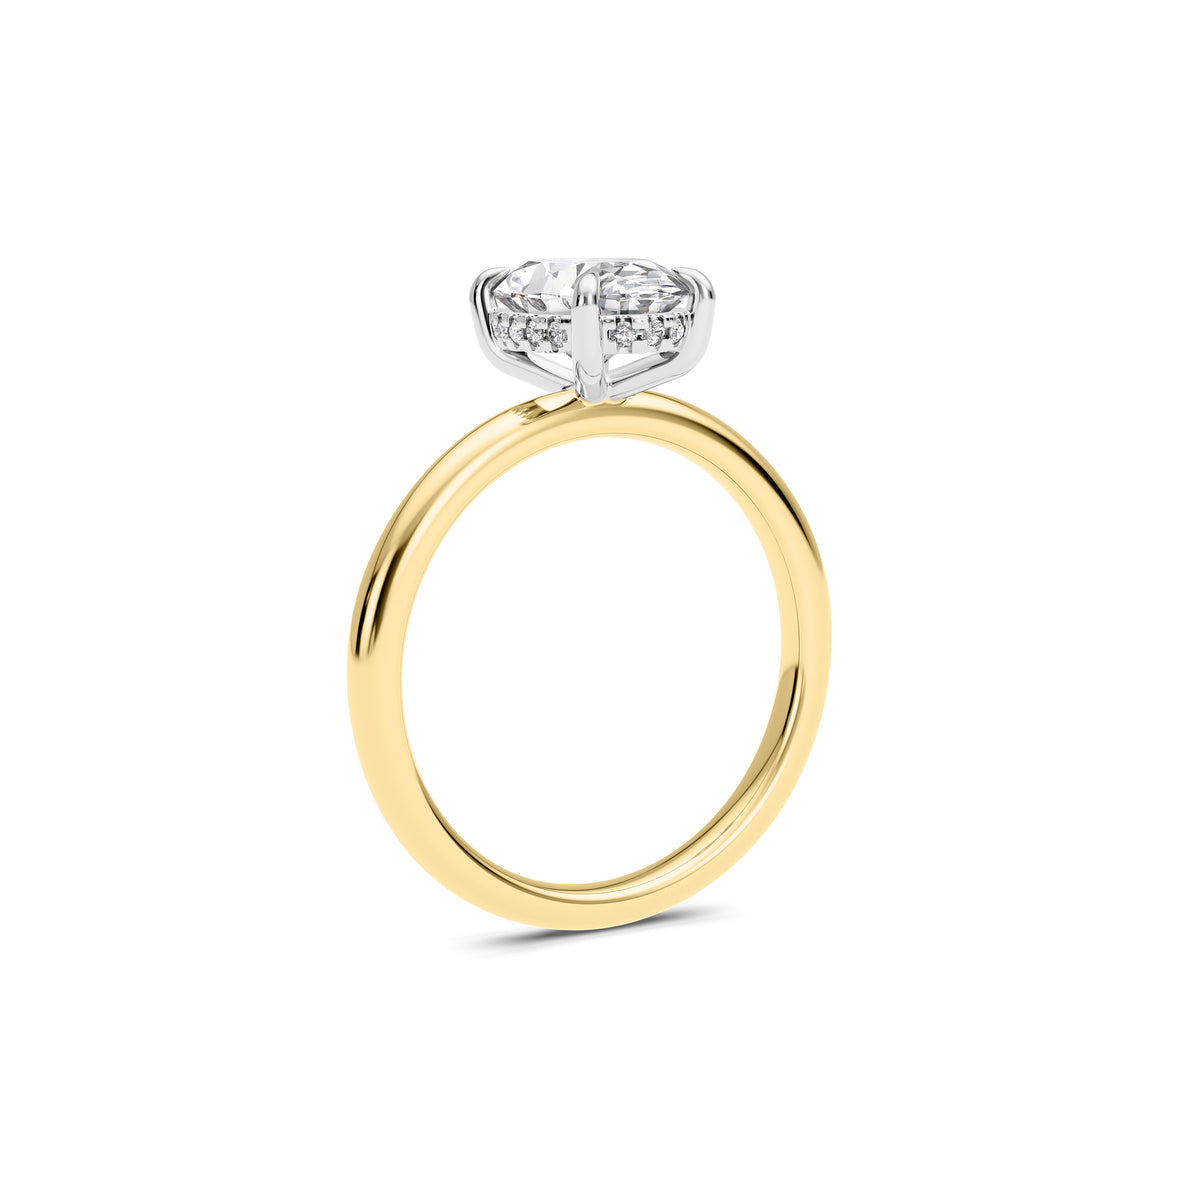 1.57 Natural Oval Cut Diamond in a Solitaire